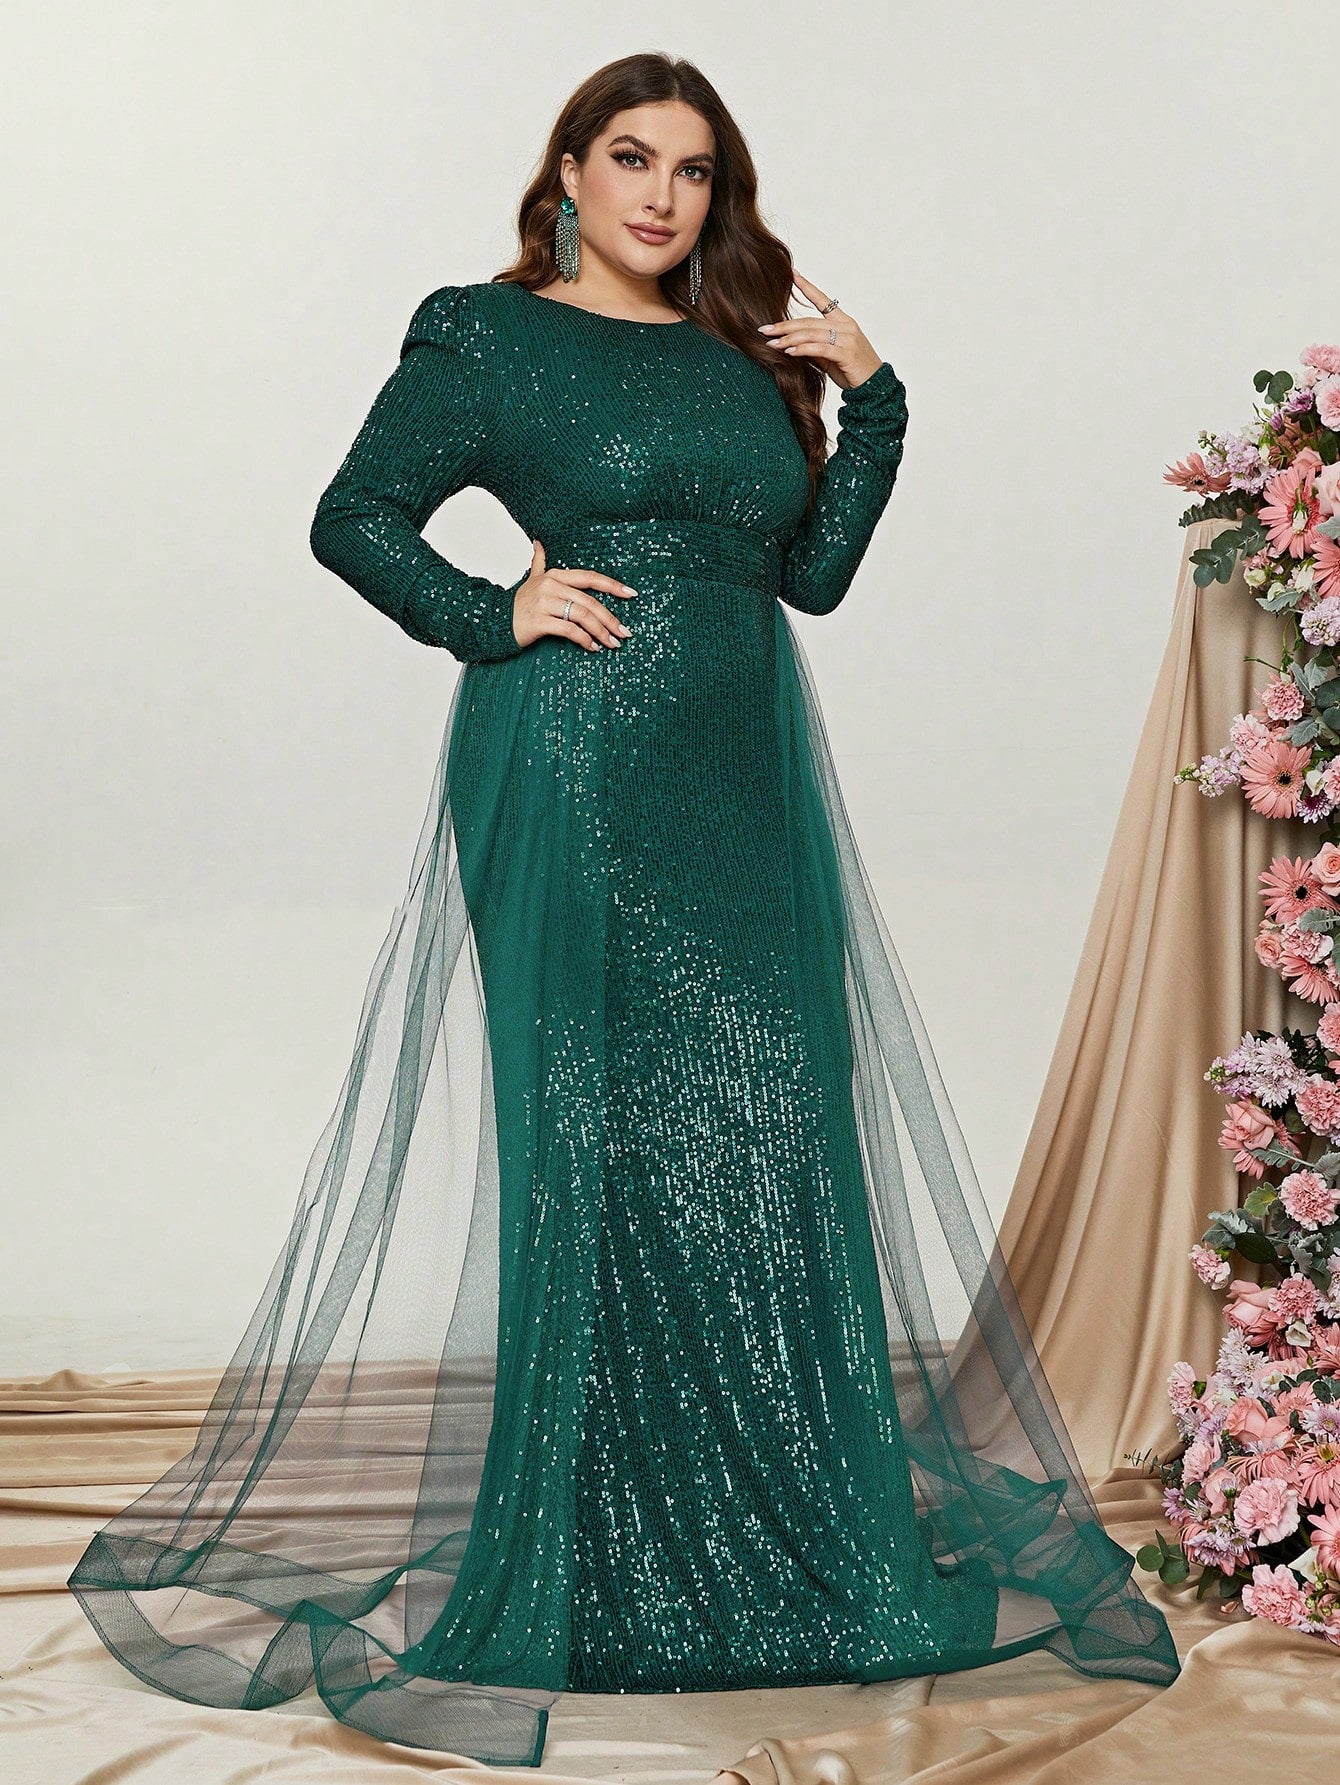 Long Sleeve Sequin Mermaid Dresses With Mesh Layer on Waist